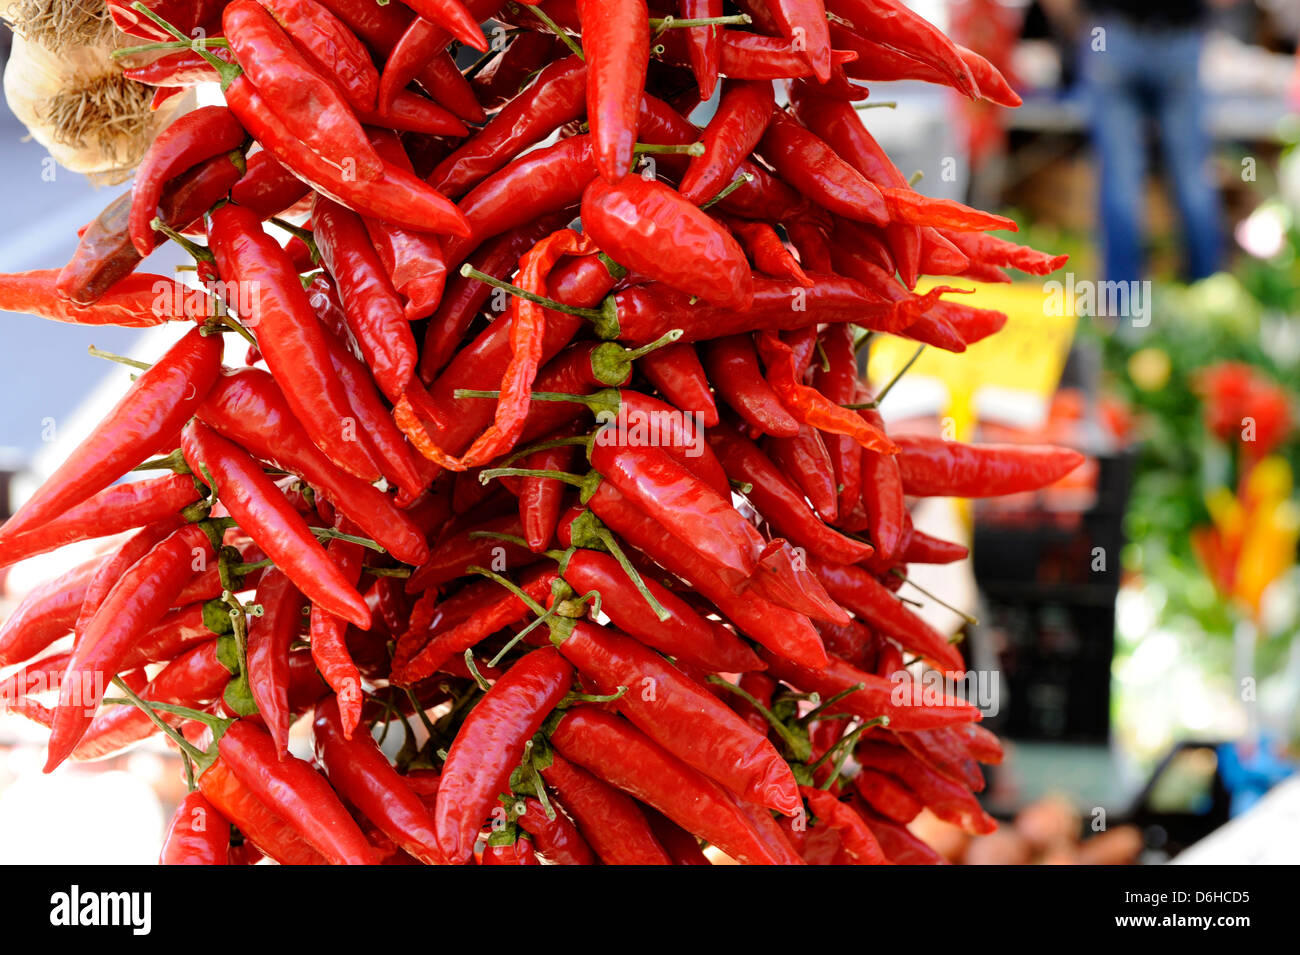 Spicy hot chillis for sale in Italian market , Italy Stock Photo